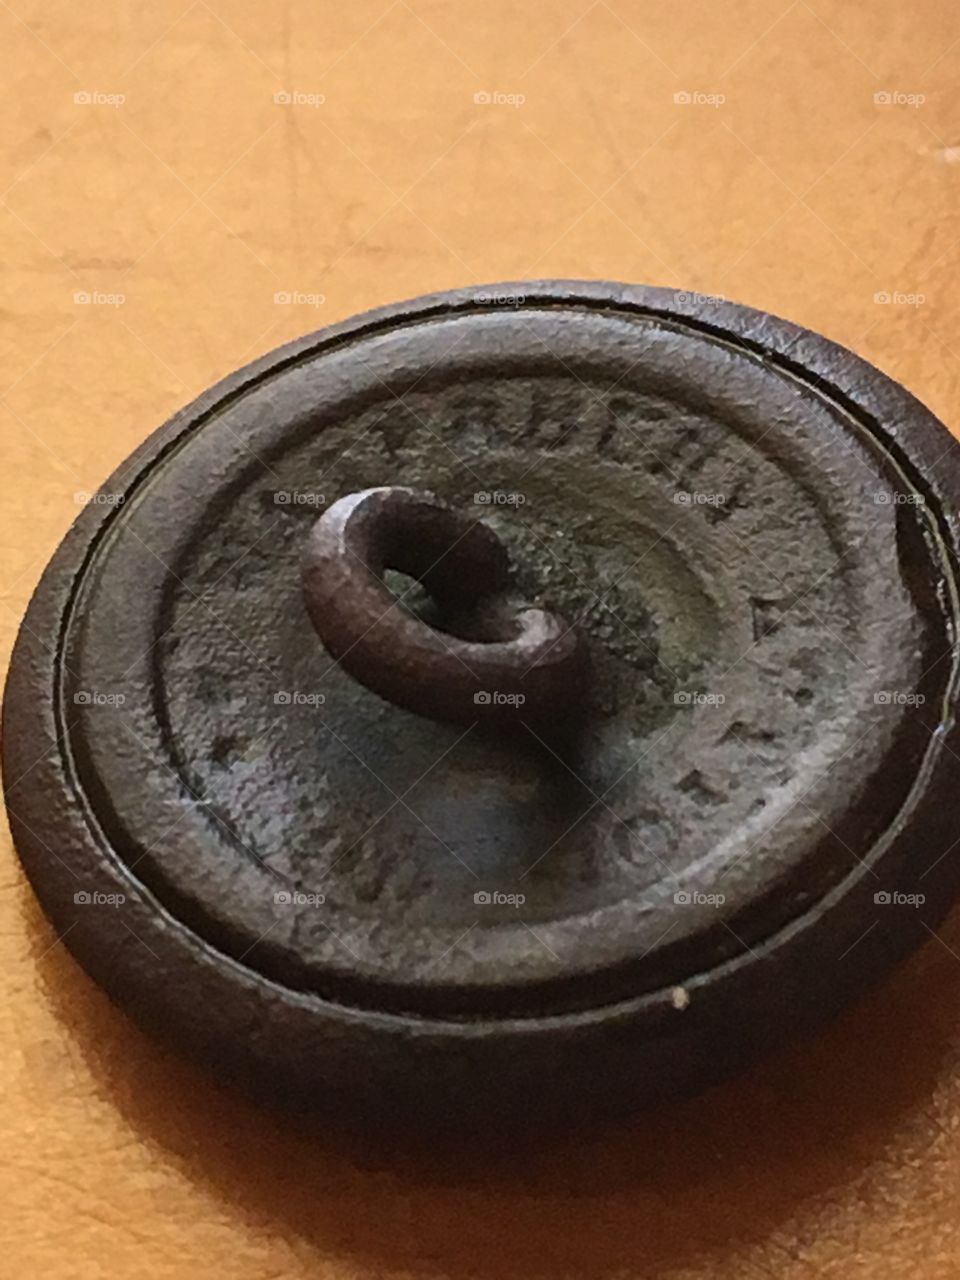 Backside of a dug civil war button - metal detected in Texas. Made by Waterbury Button Co. Circa 1860's.